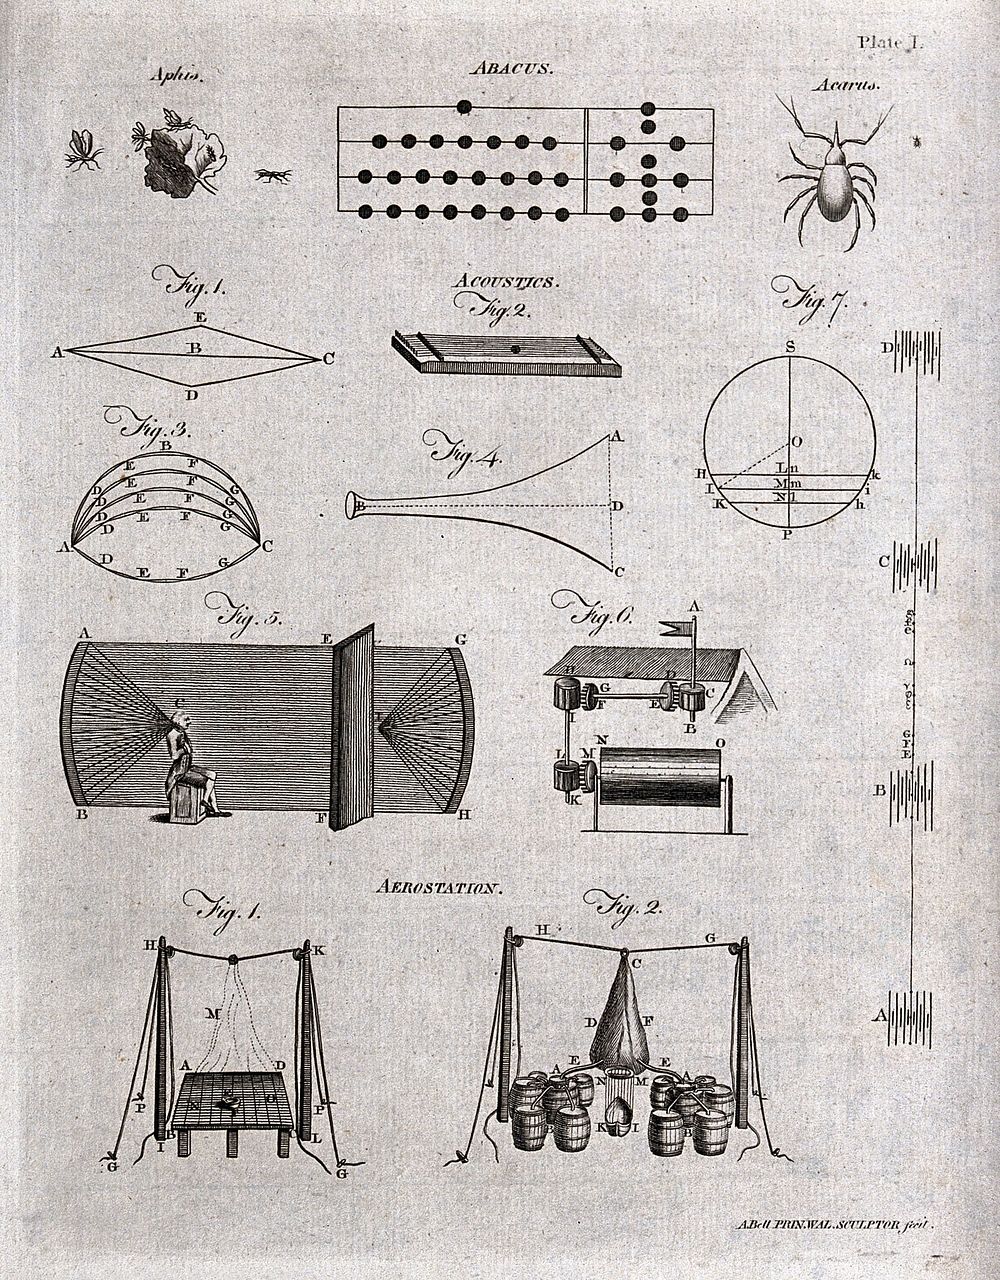 Inventions: various things beginning with "A". Engraving by A. Bell.